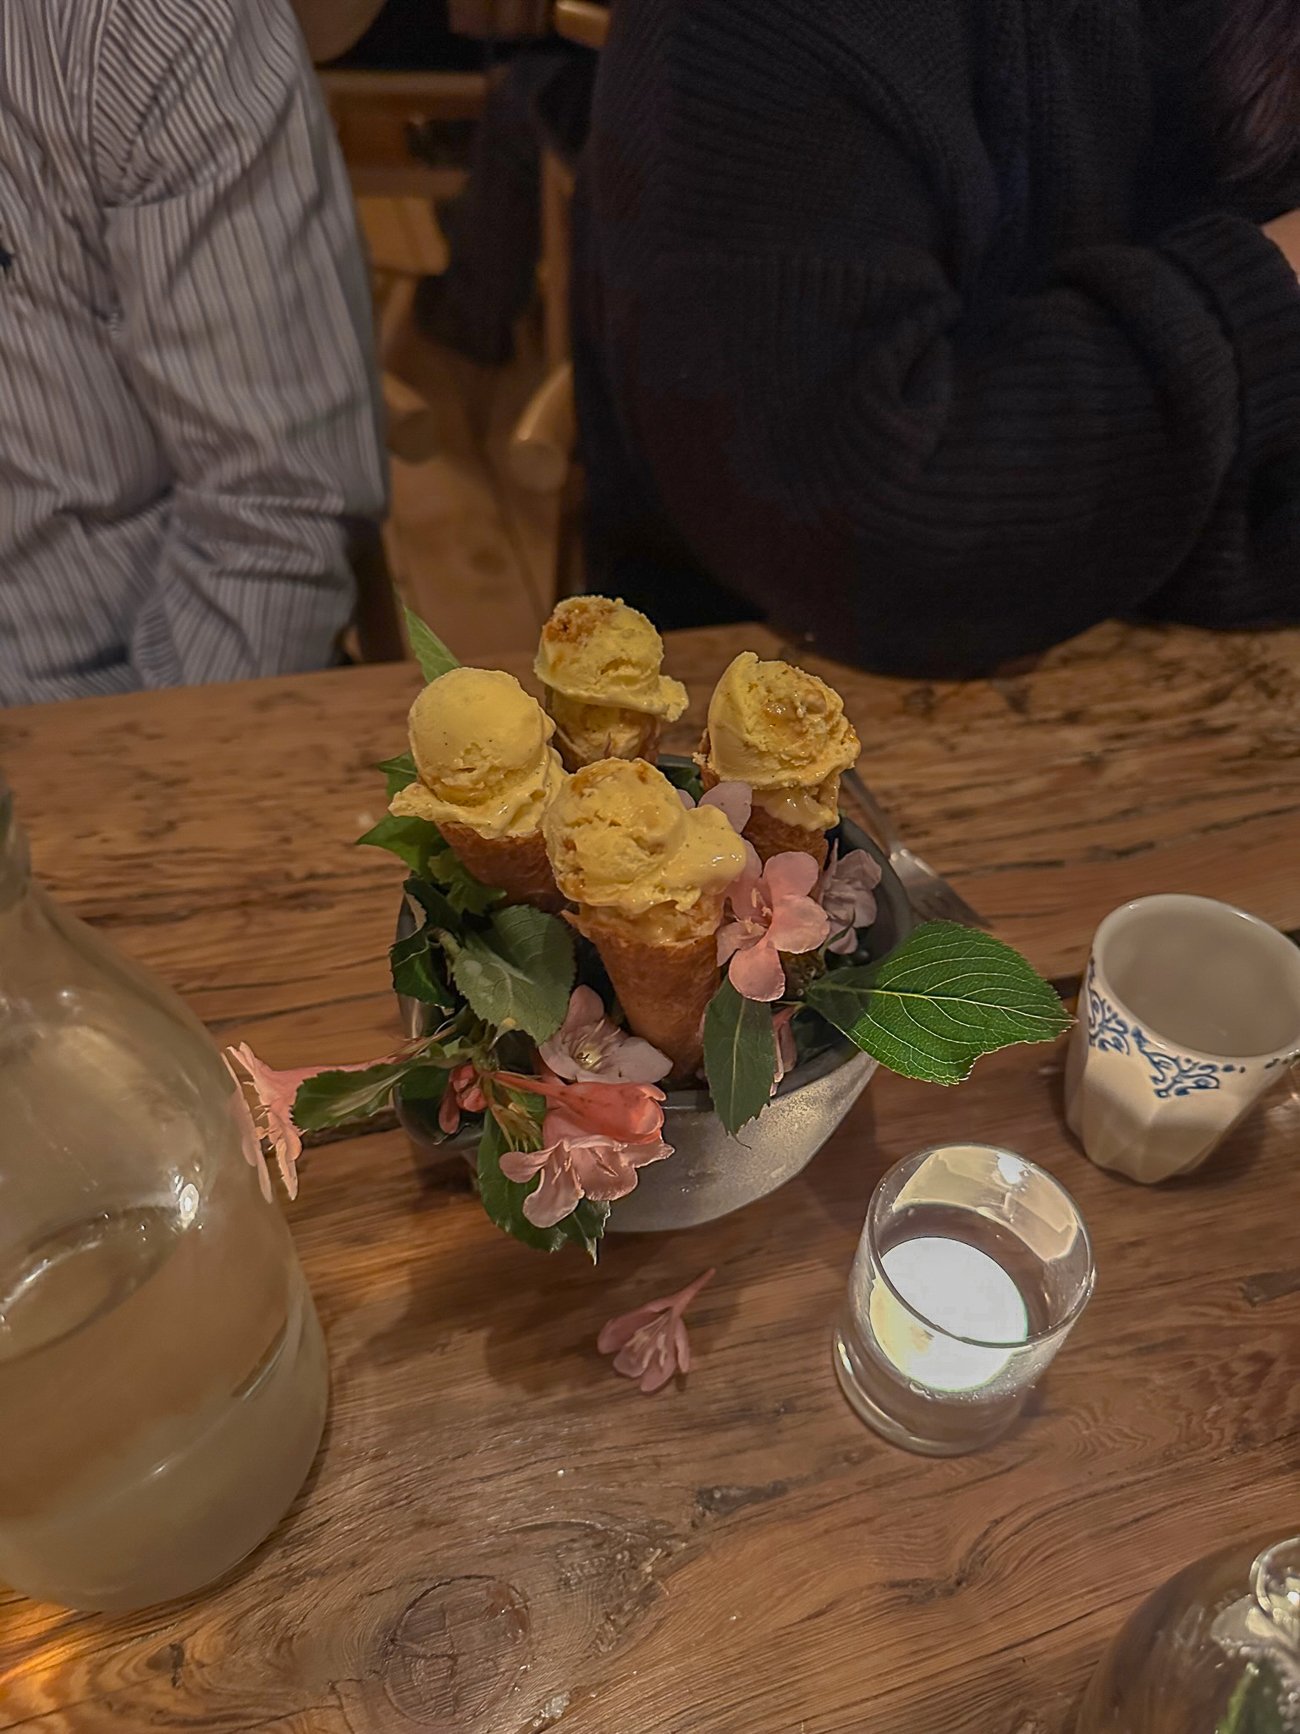 Four mini ice cream cones served in a bed of flowers at The Lost Kitchen